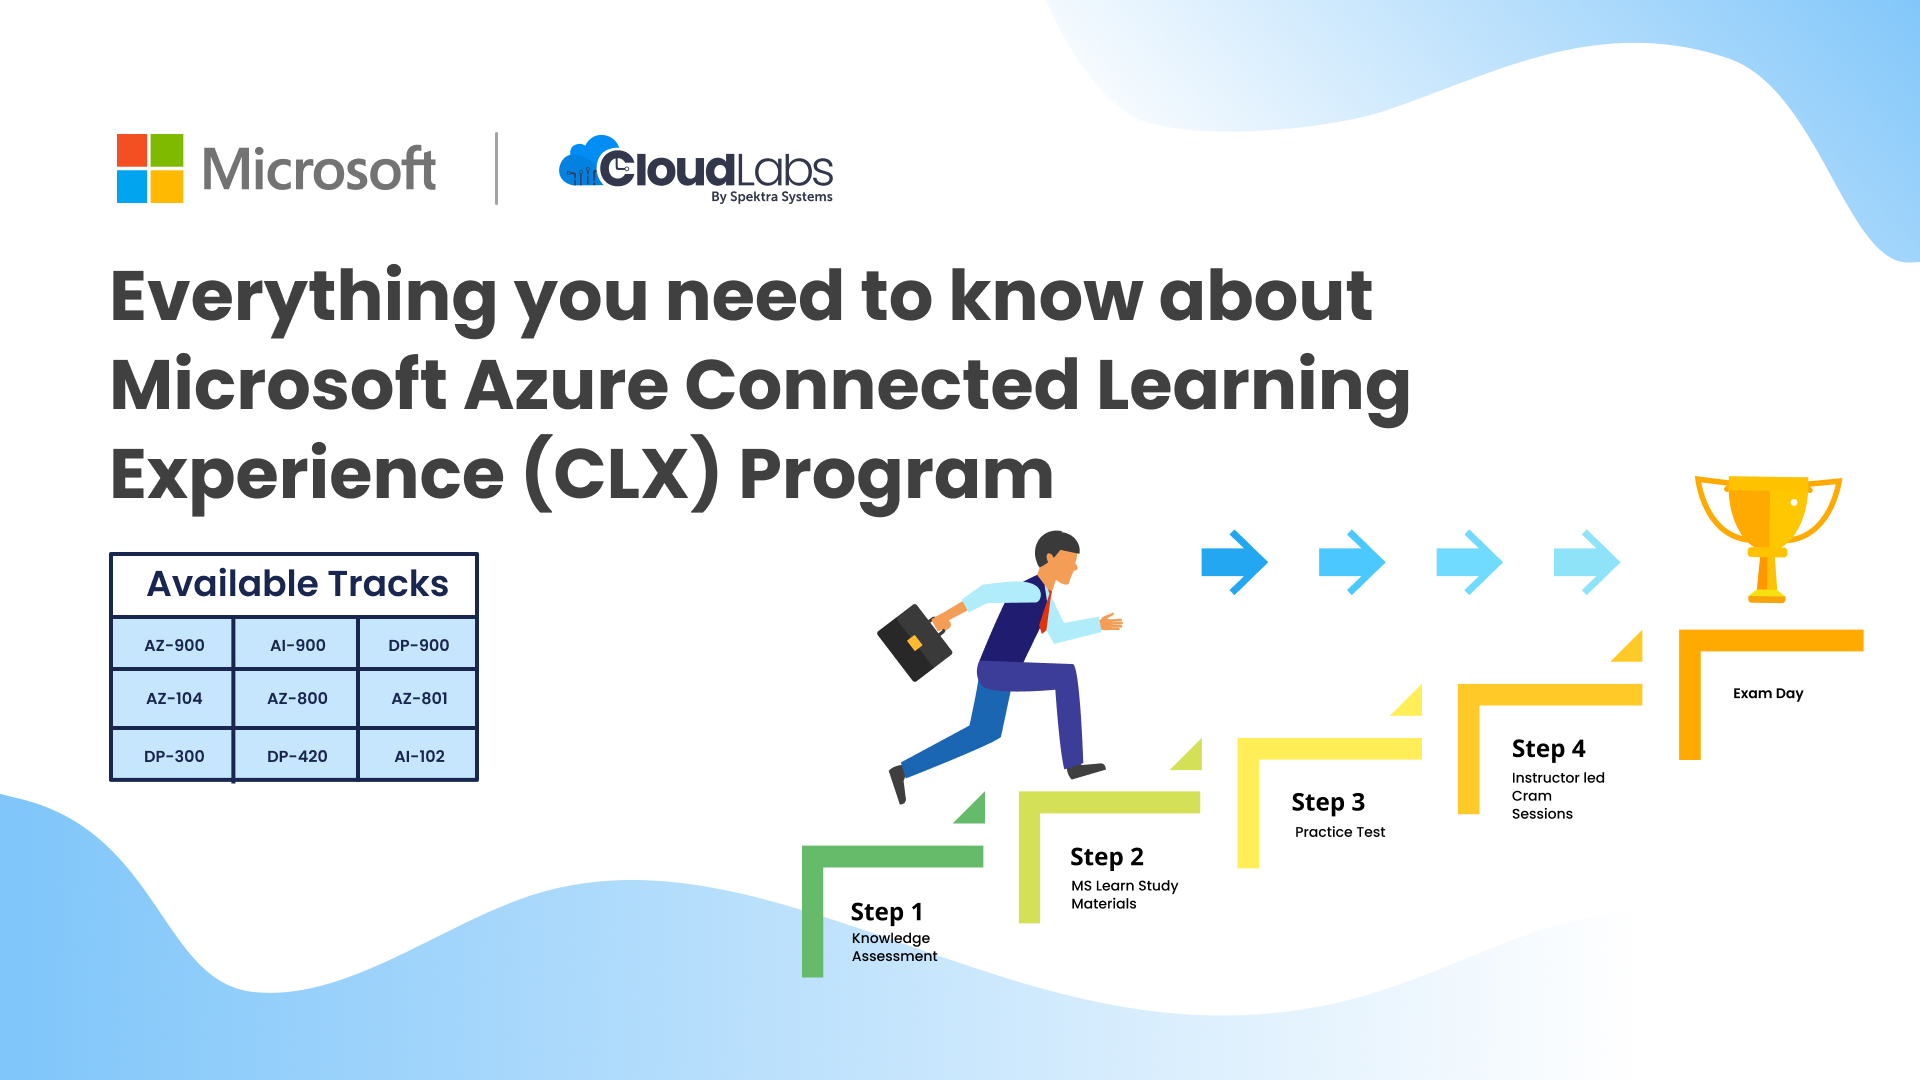 Everything you need to know about the Microsoft Azure Connected Learning Experience Program (CLX)